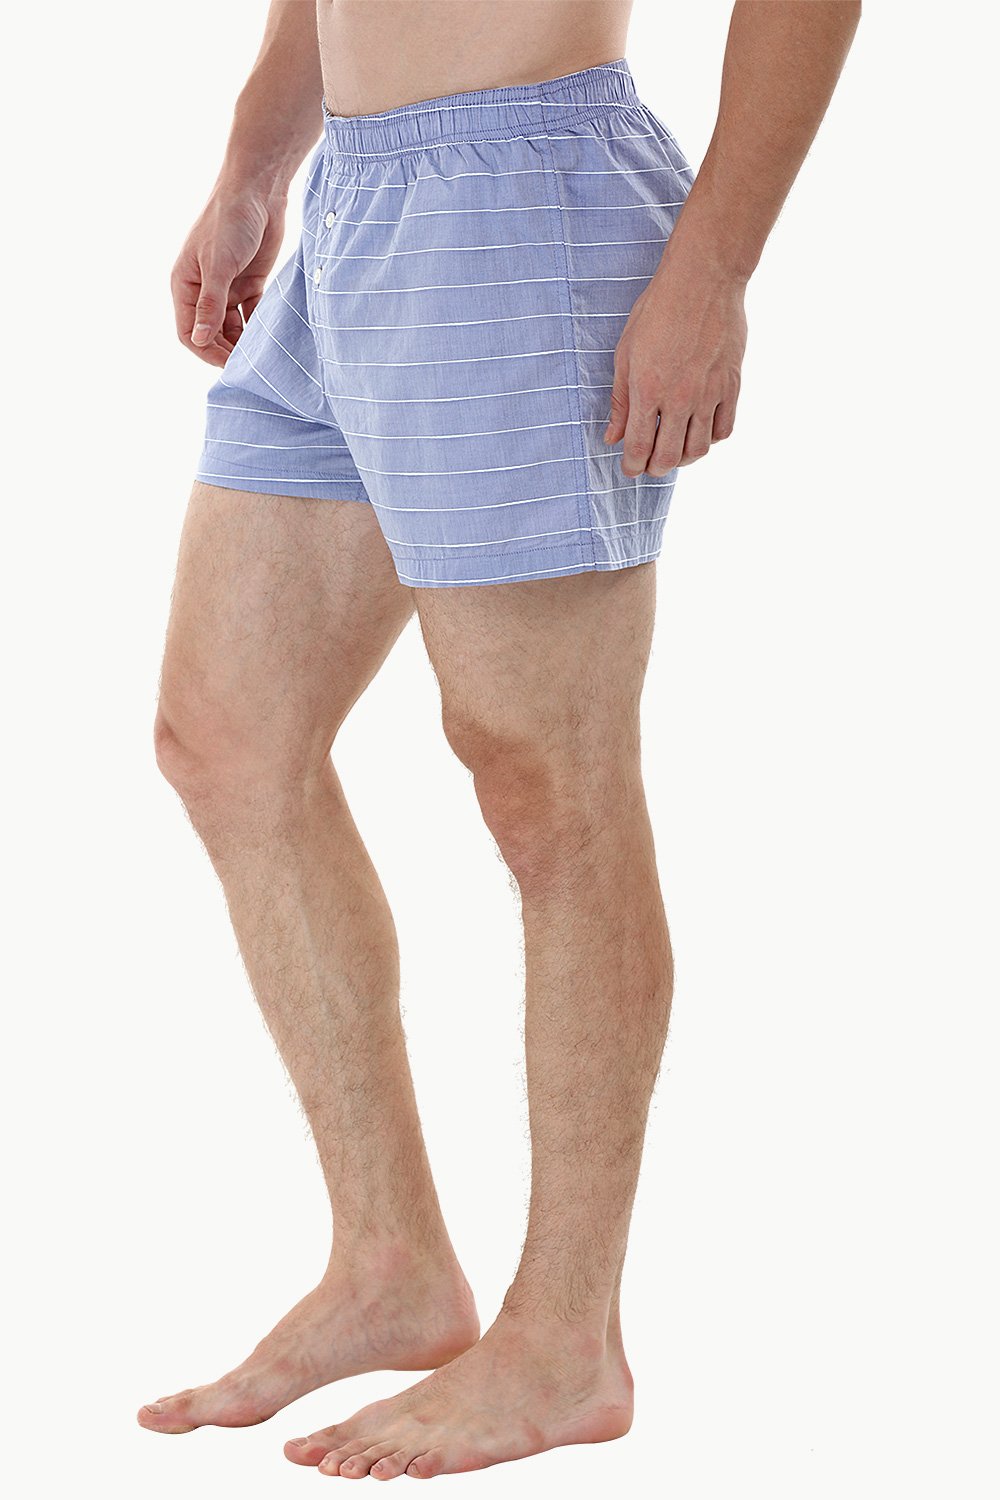 Buy Online Elastic Band Woven Boxer Shorts for Men Online in India at ...